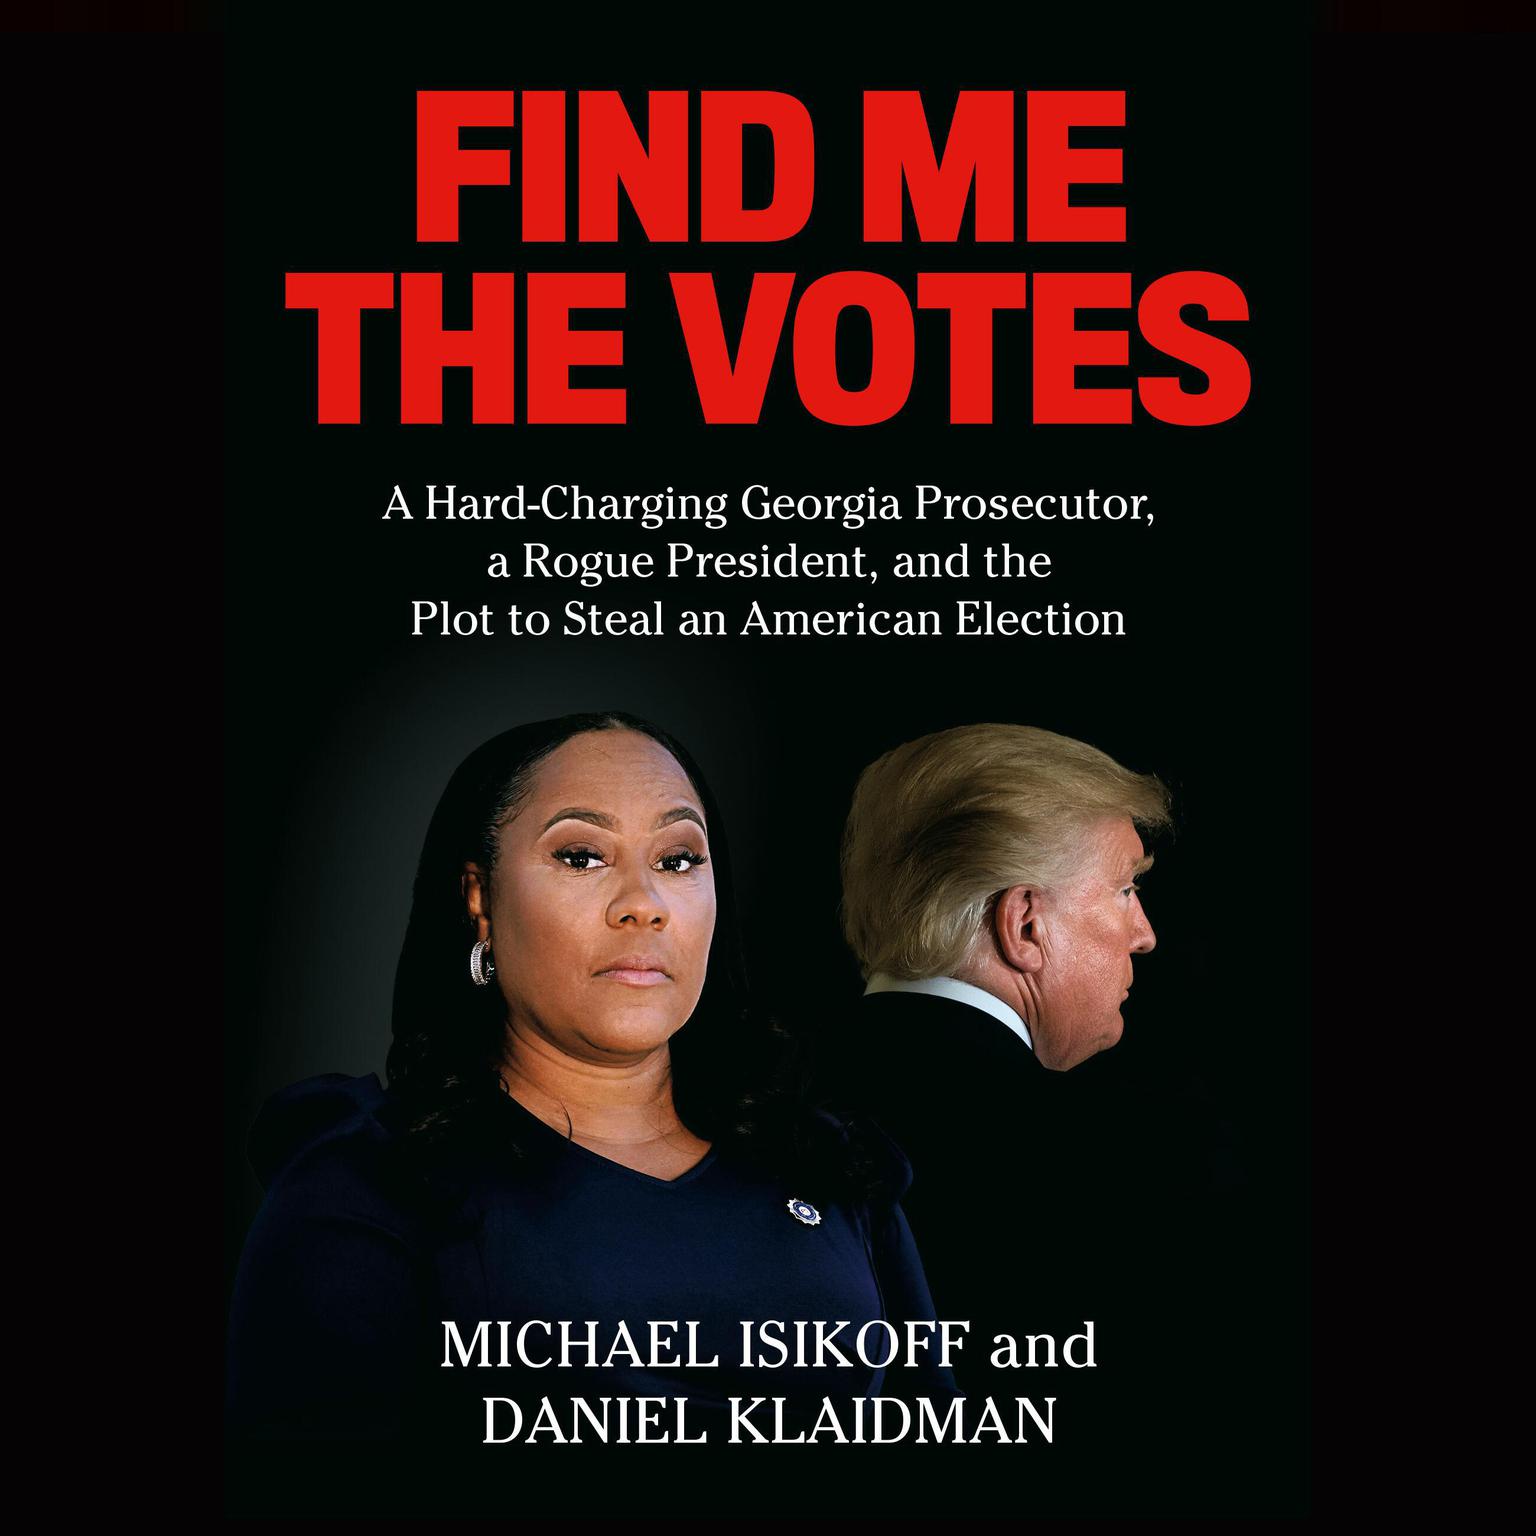 Find Me the Votes: A Hard-Charging Georgia Prosecutor, a Rogue President, and the Plot to Steal an American Election Audiobook, by Michael Isikoff